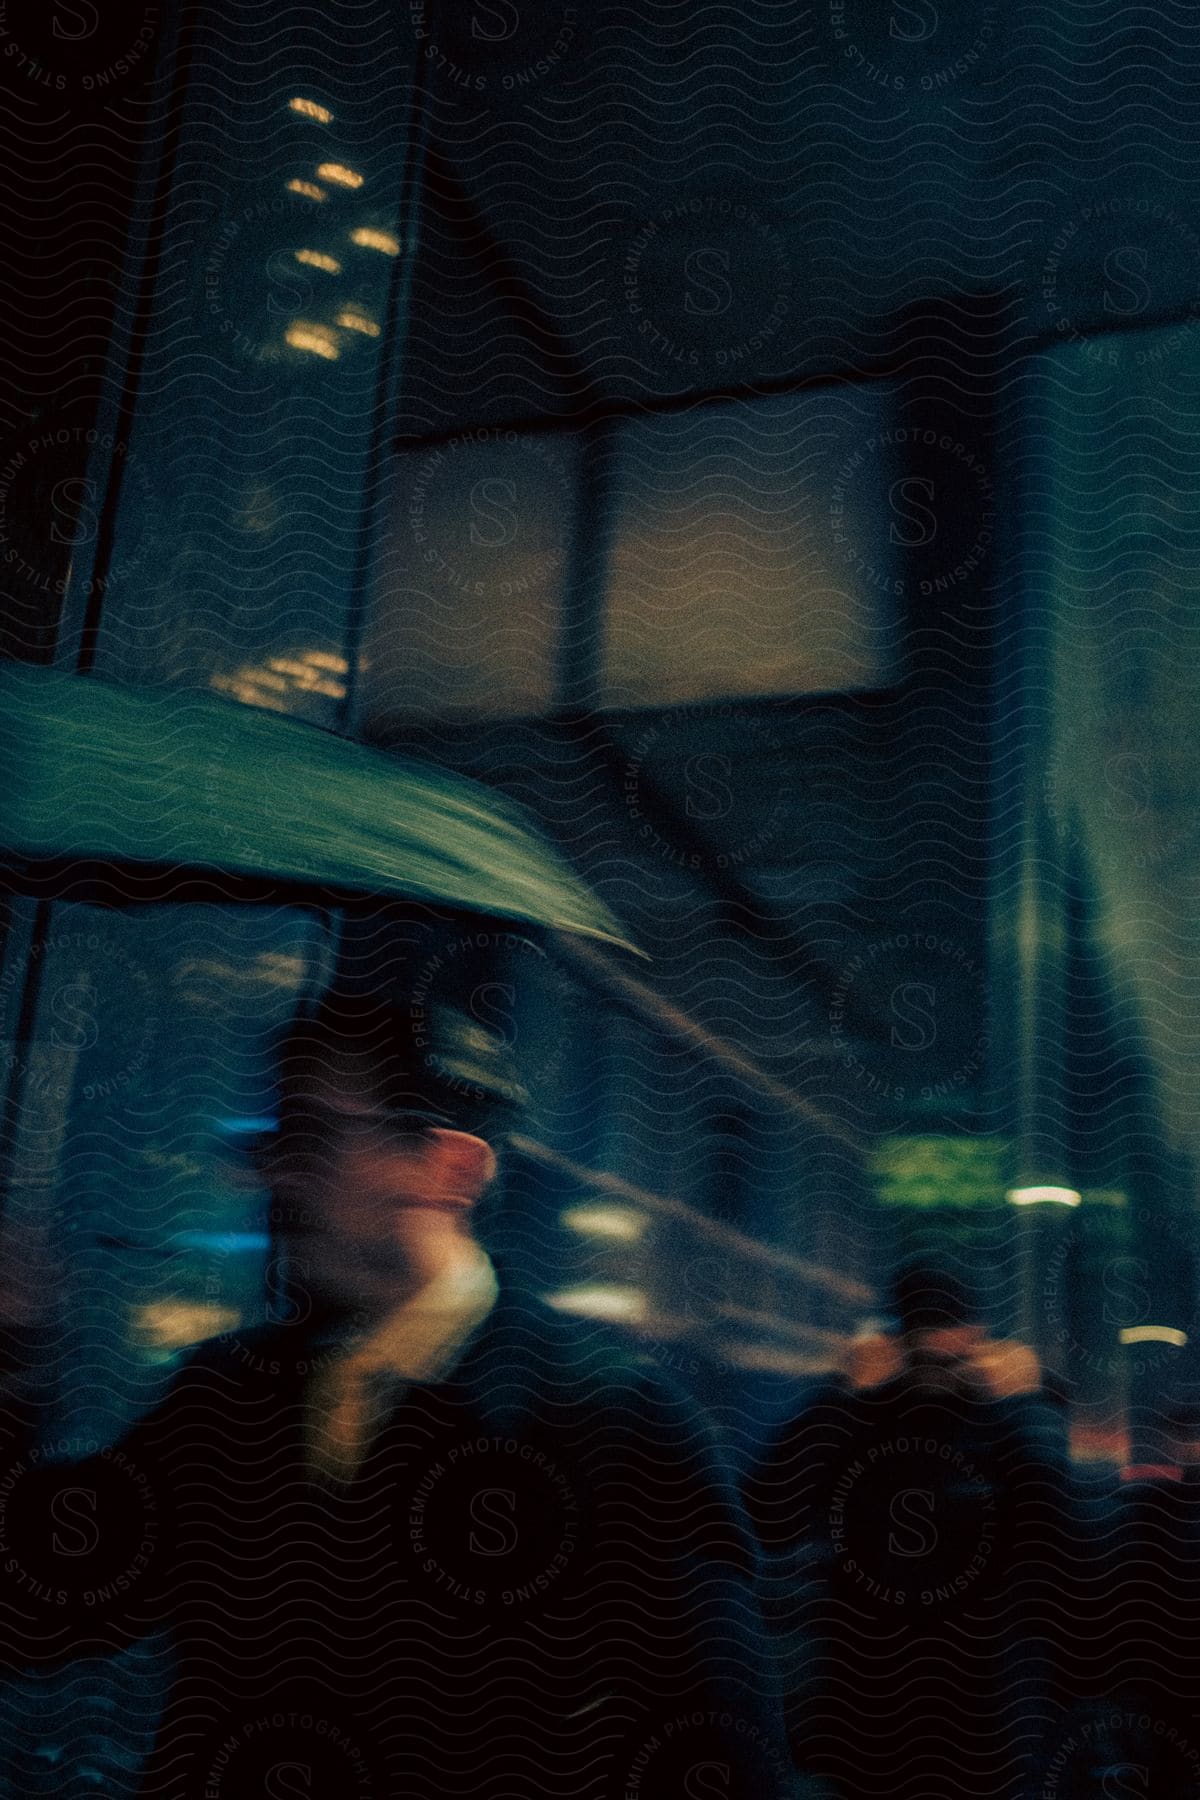 Stock photo of a person with a green umbrella walks through a rainy night city, his face obscured.